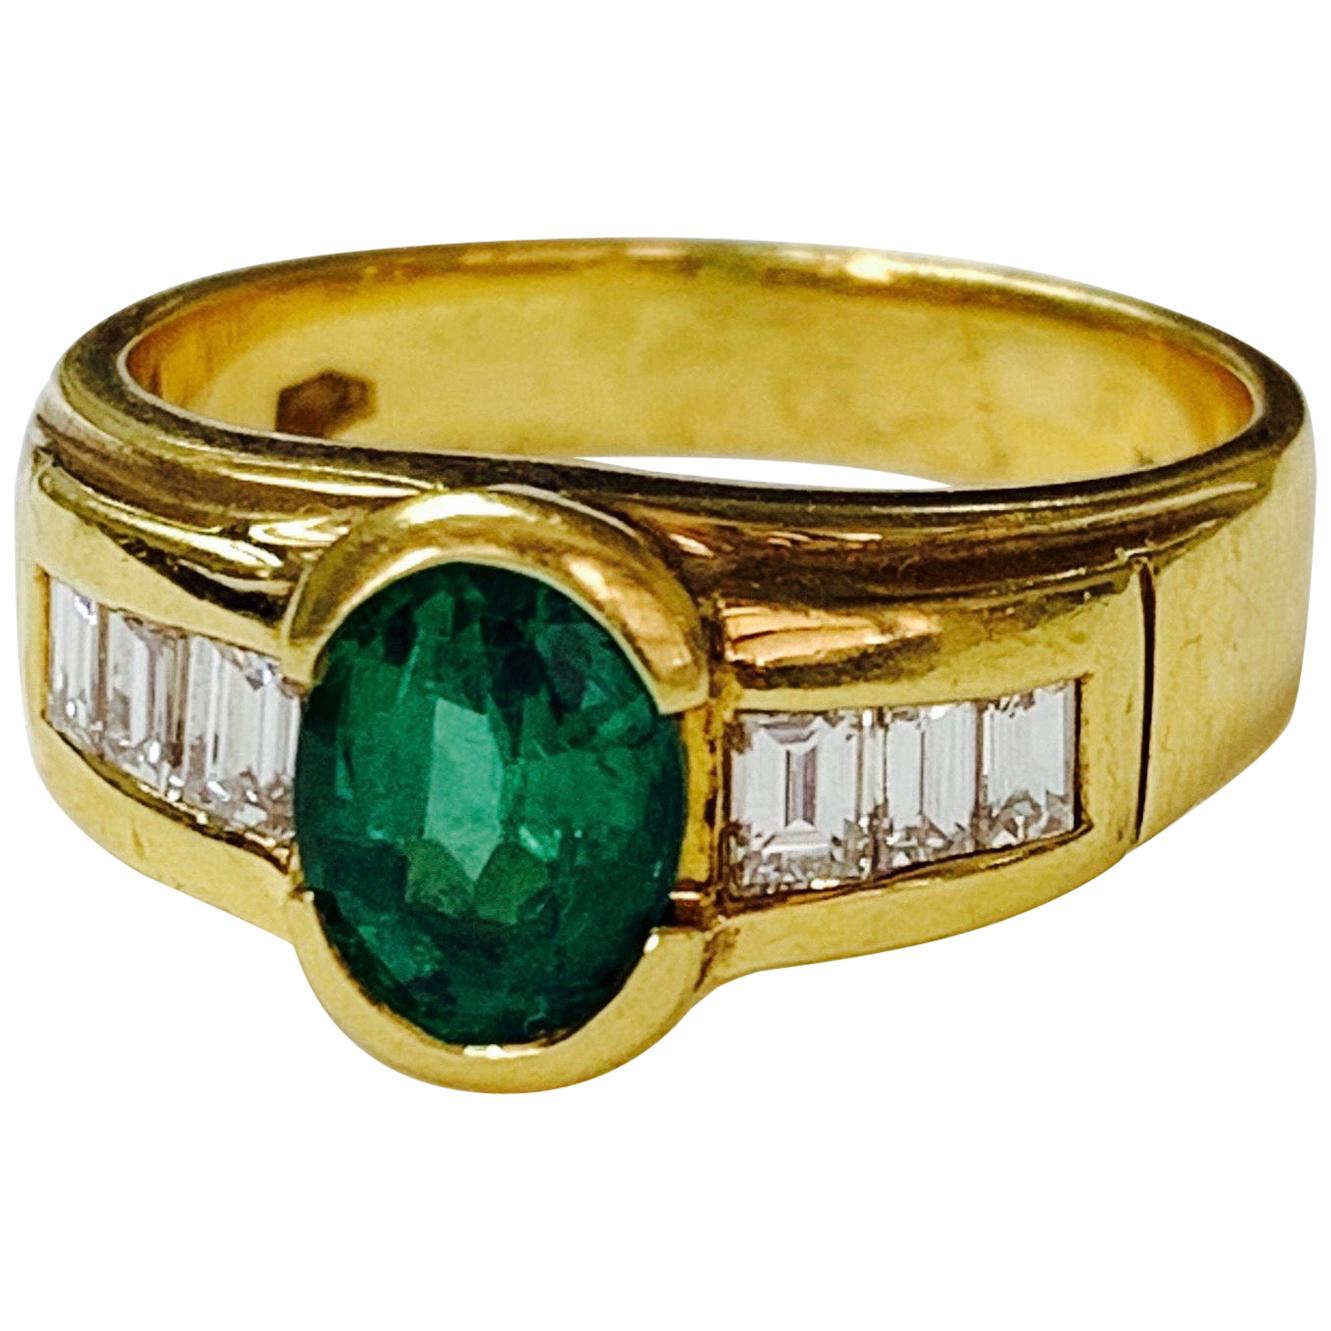 1.25 Carat Oval Emerald and Diamond Engagement Ring in 18 Karat Yellow Gold